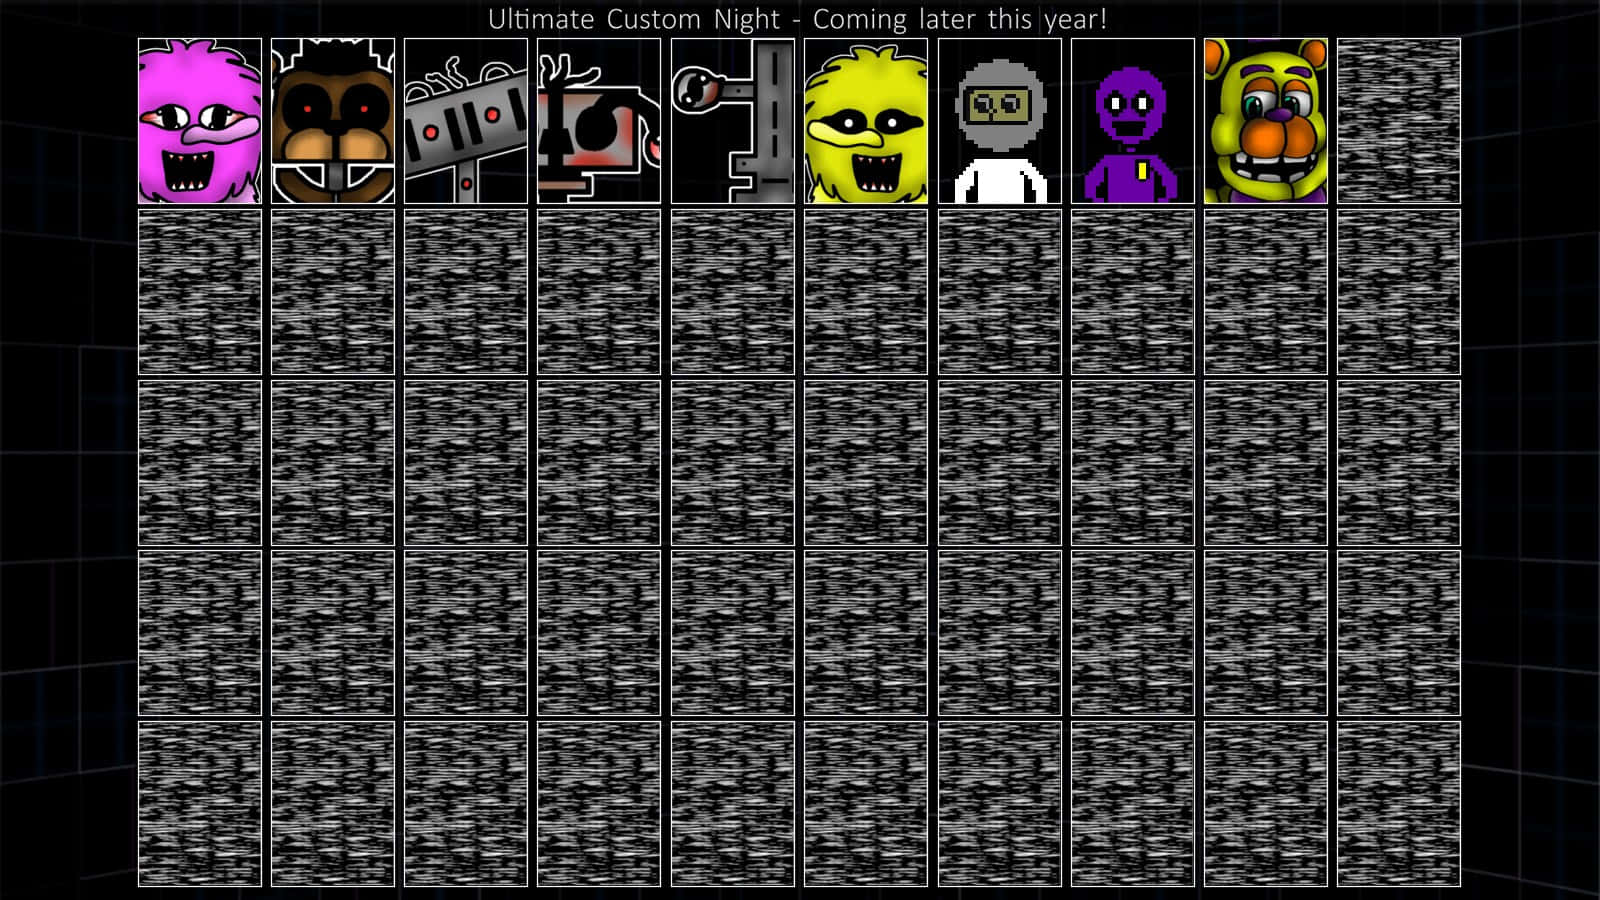 Ultimate Custom Night - An exciting night of horror and thrill Wallpaper